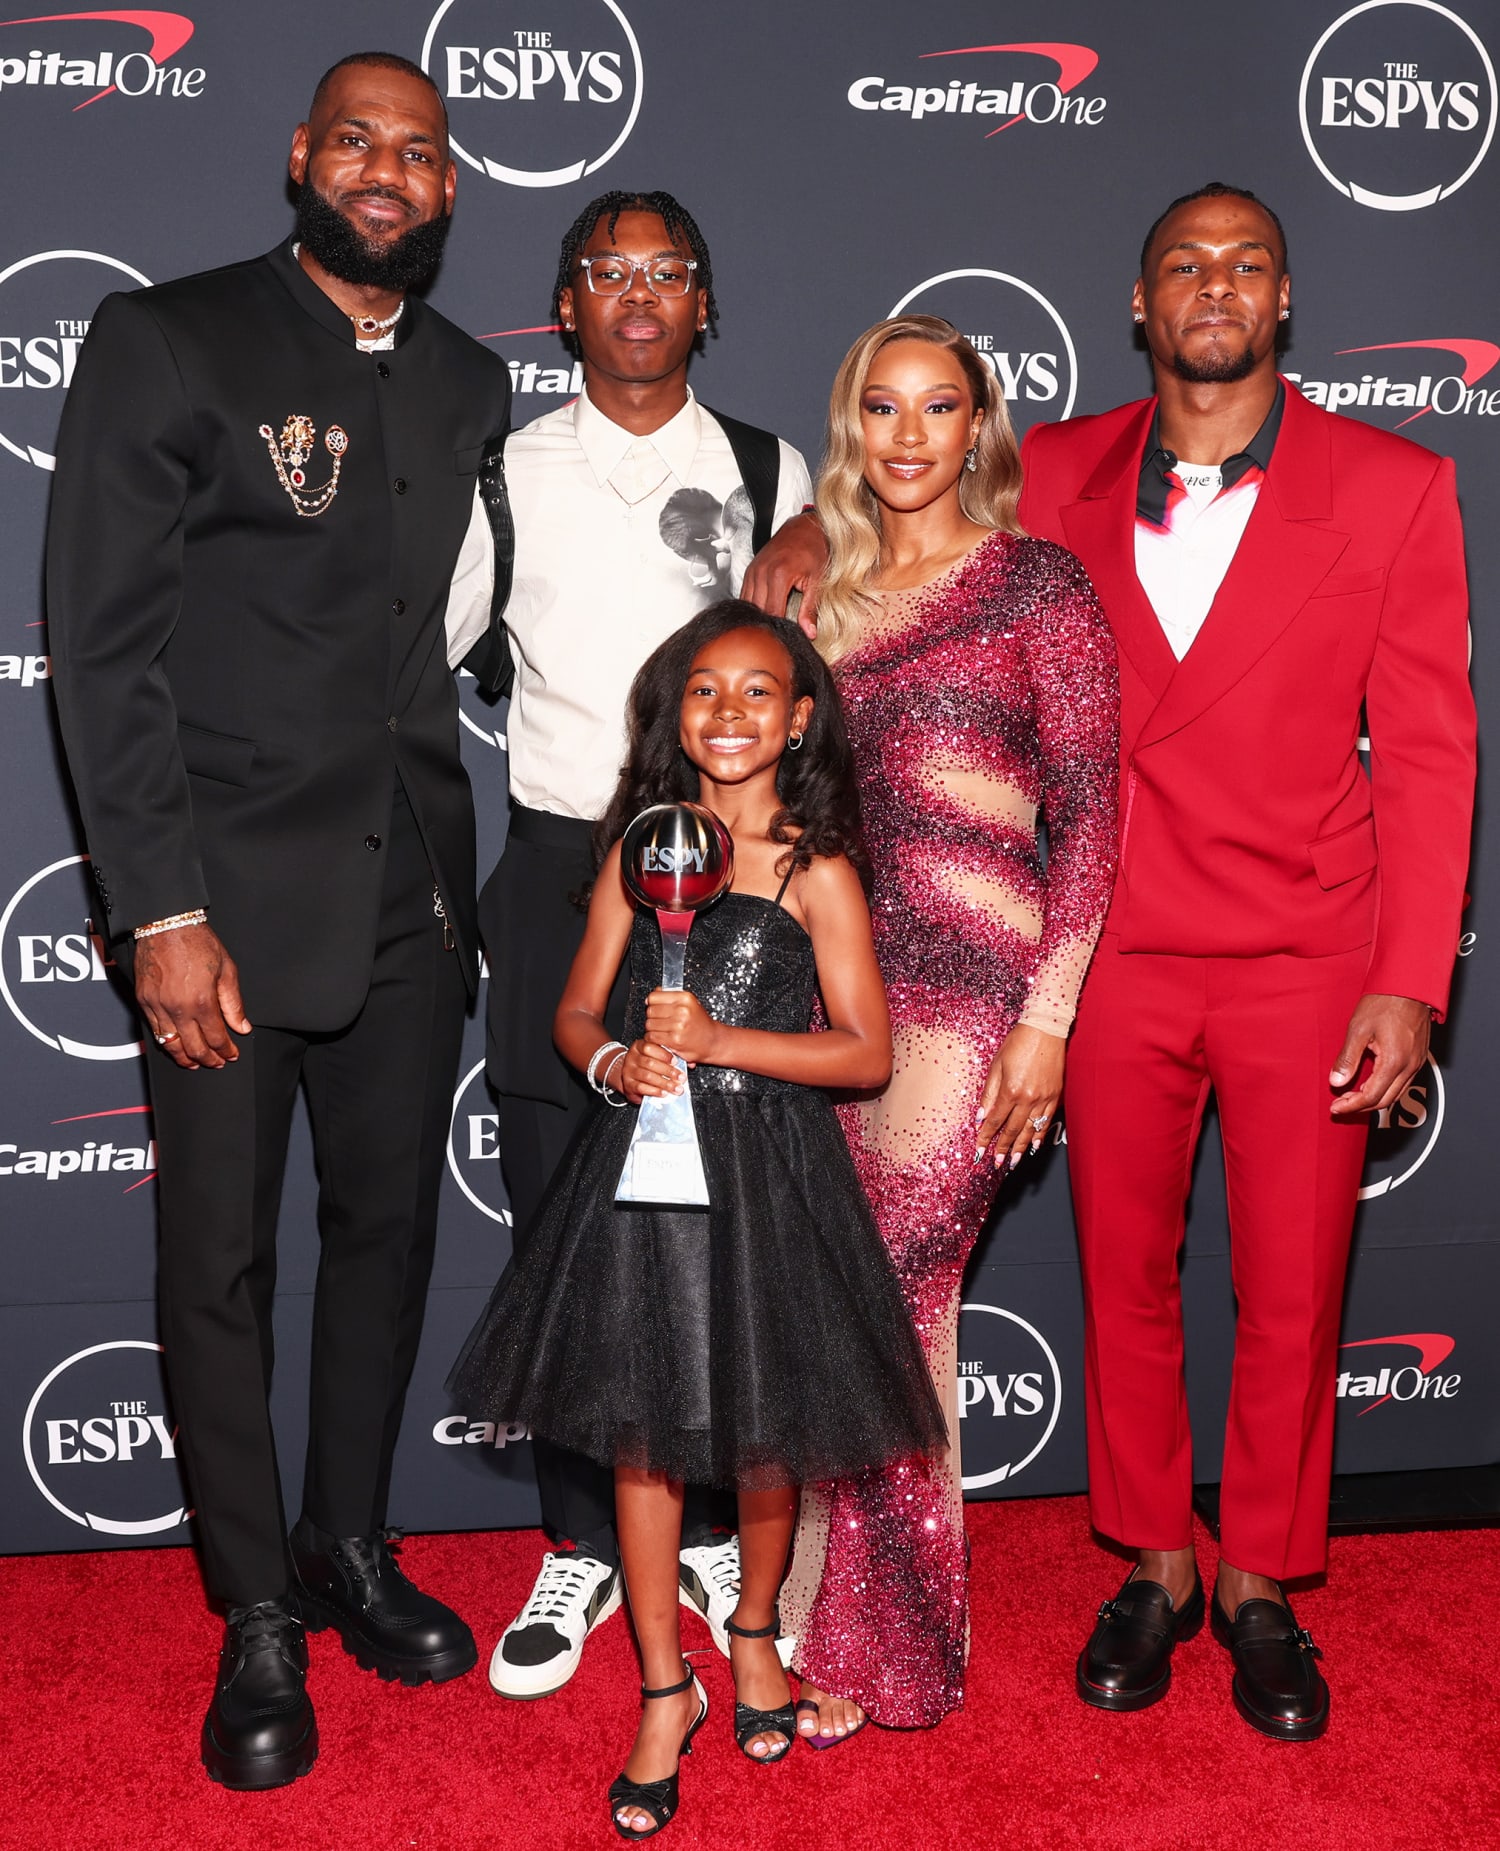 LeBron James Stars on 'Sports Illustrated' Cover with Sons Bryce and Bronny